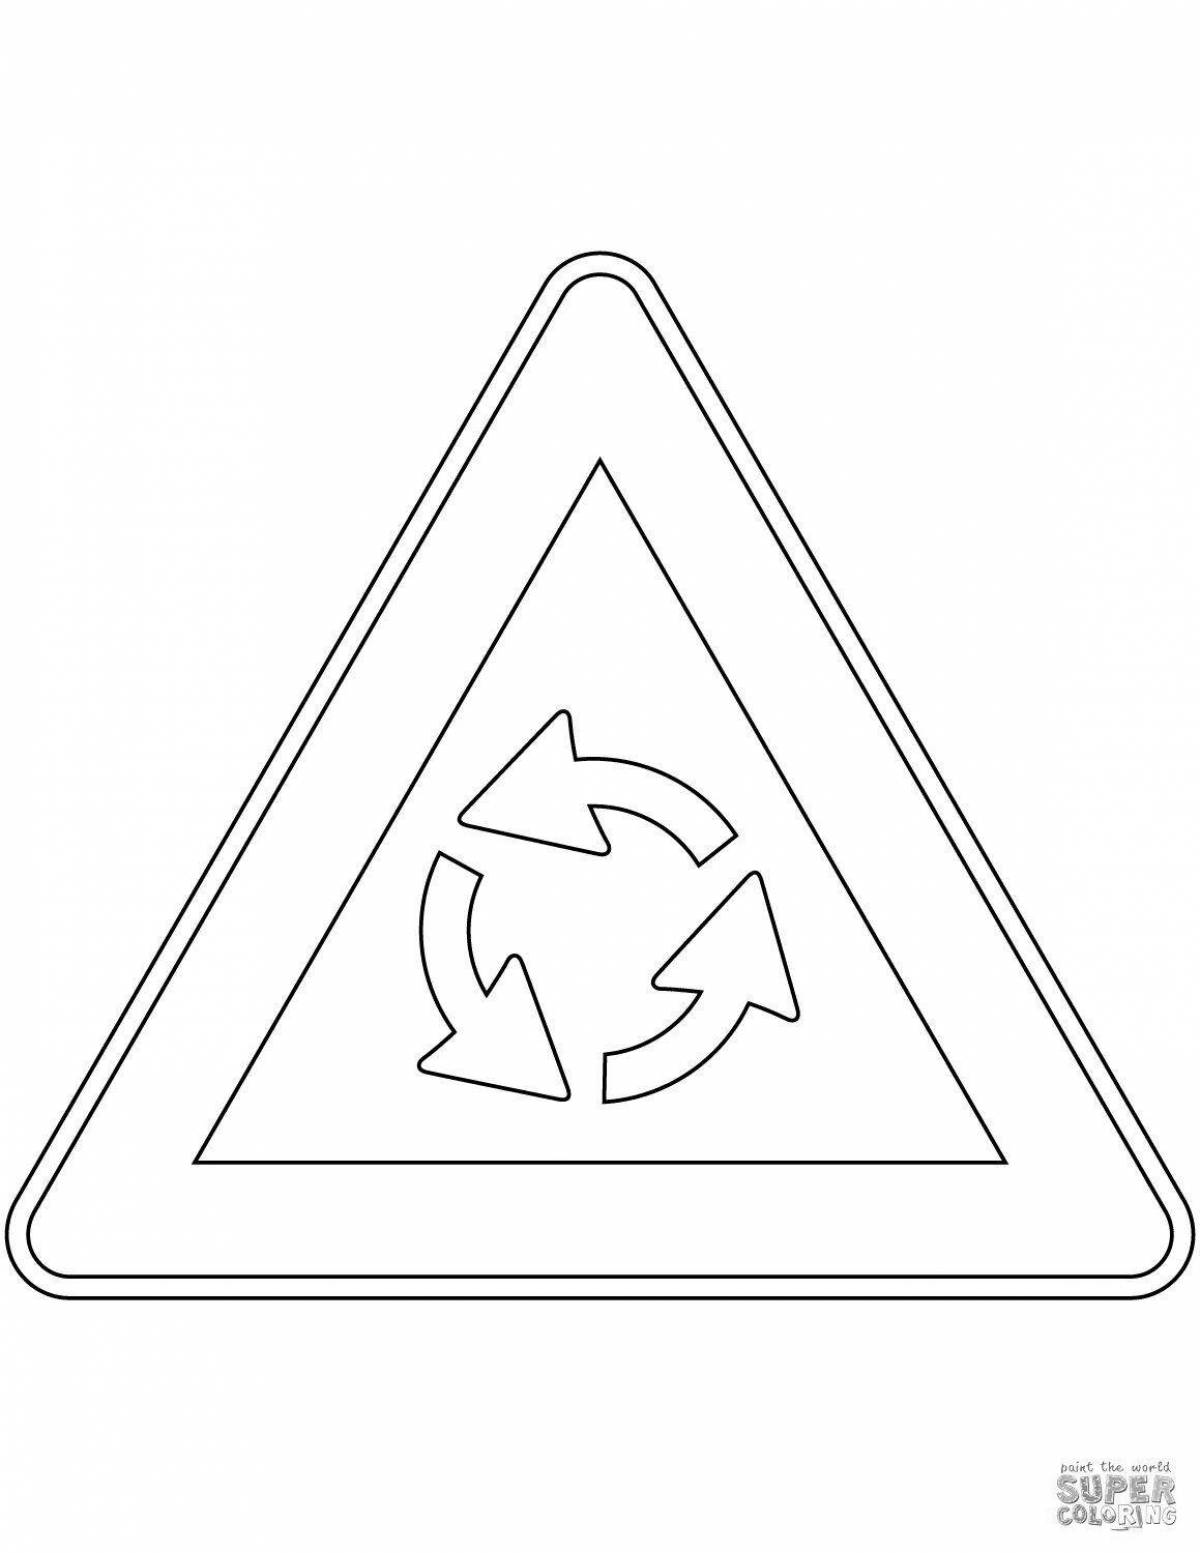 Funny traffic signs coloring page